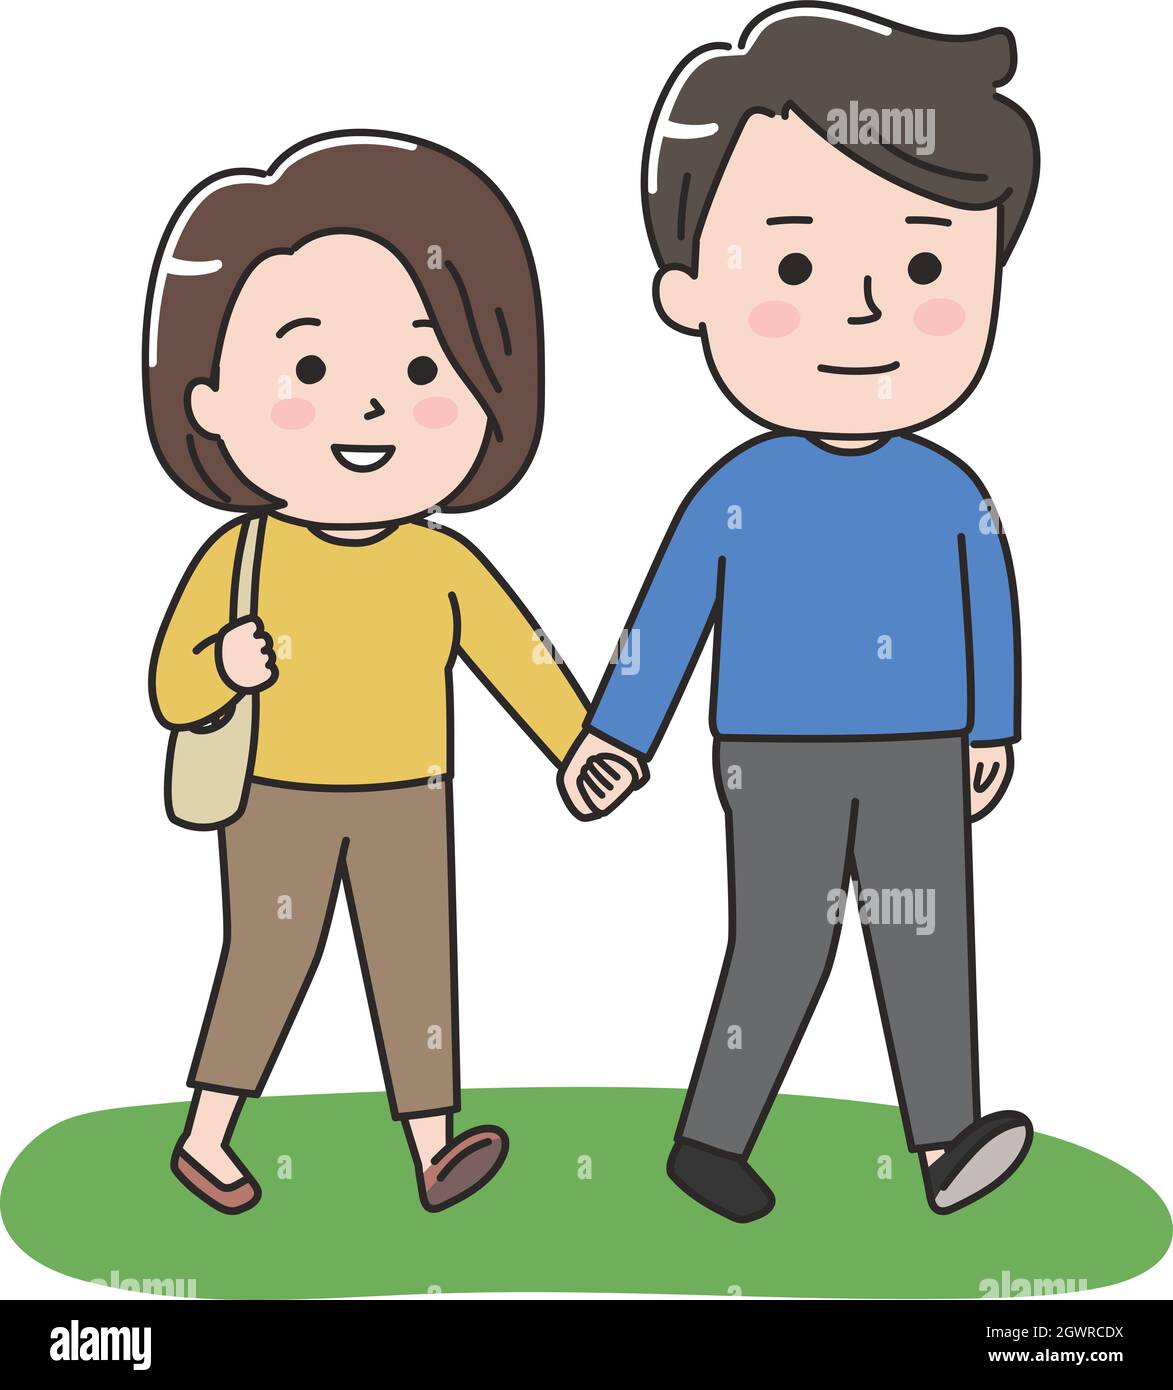 The couple happily walking hand in hand. Vector illustration on a white background. Stock Vector